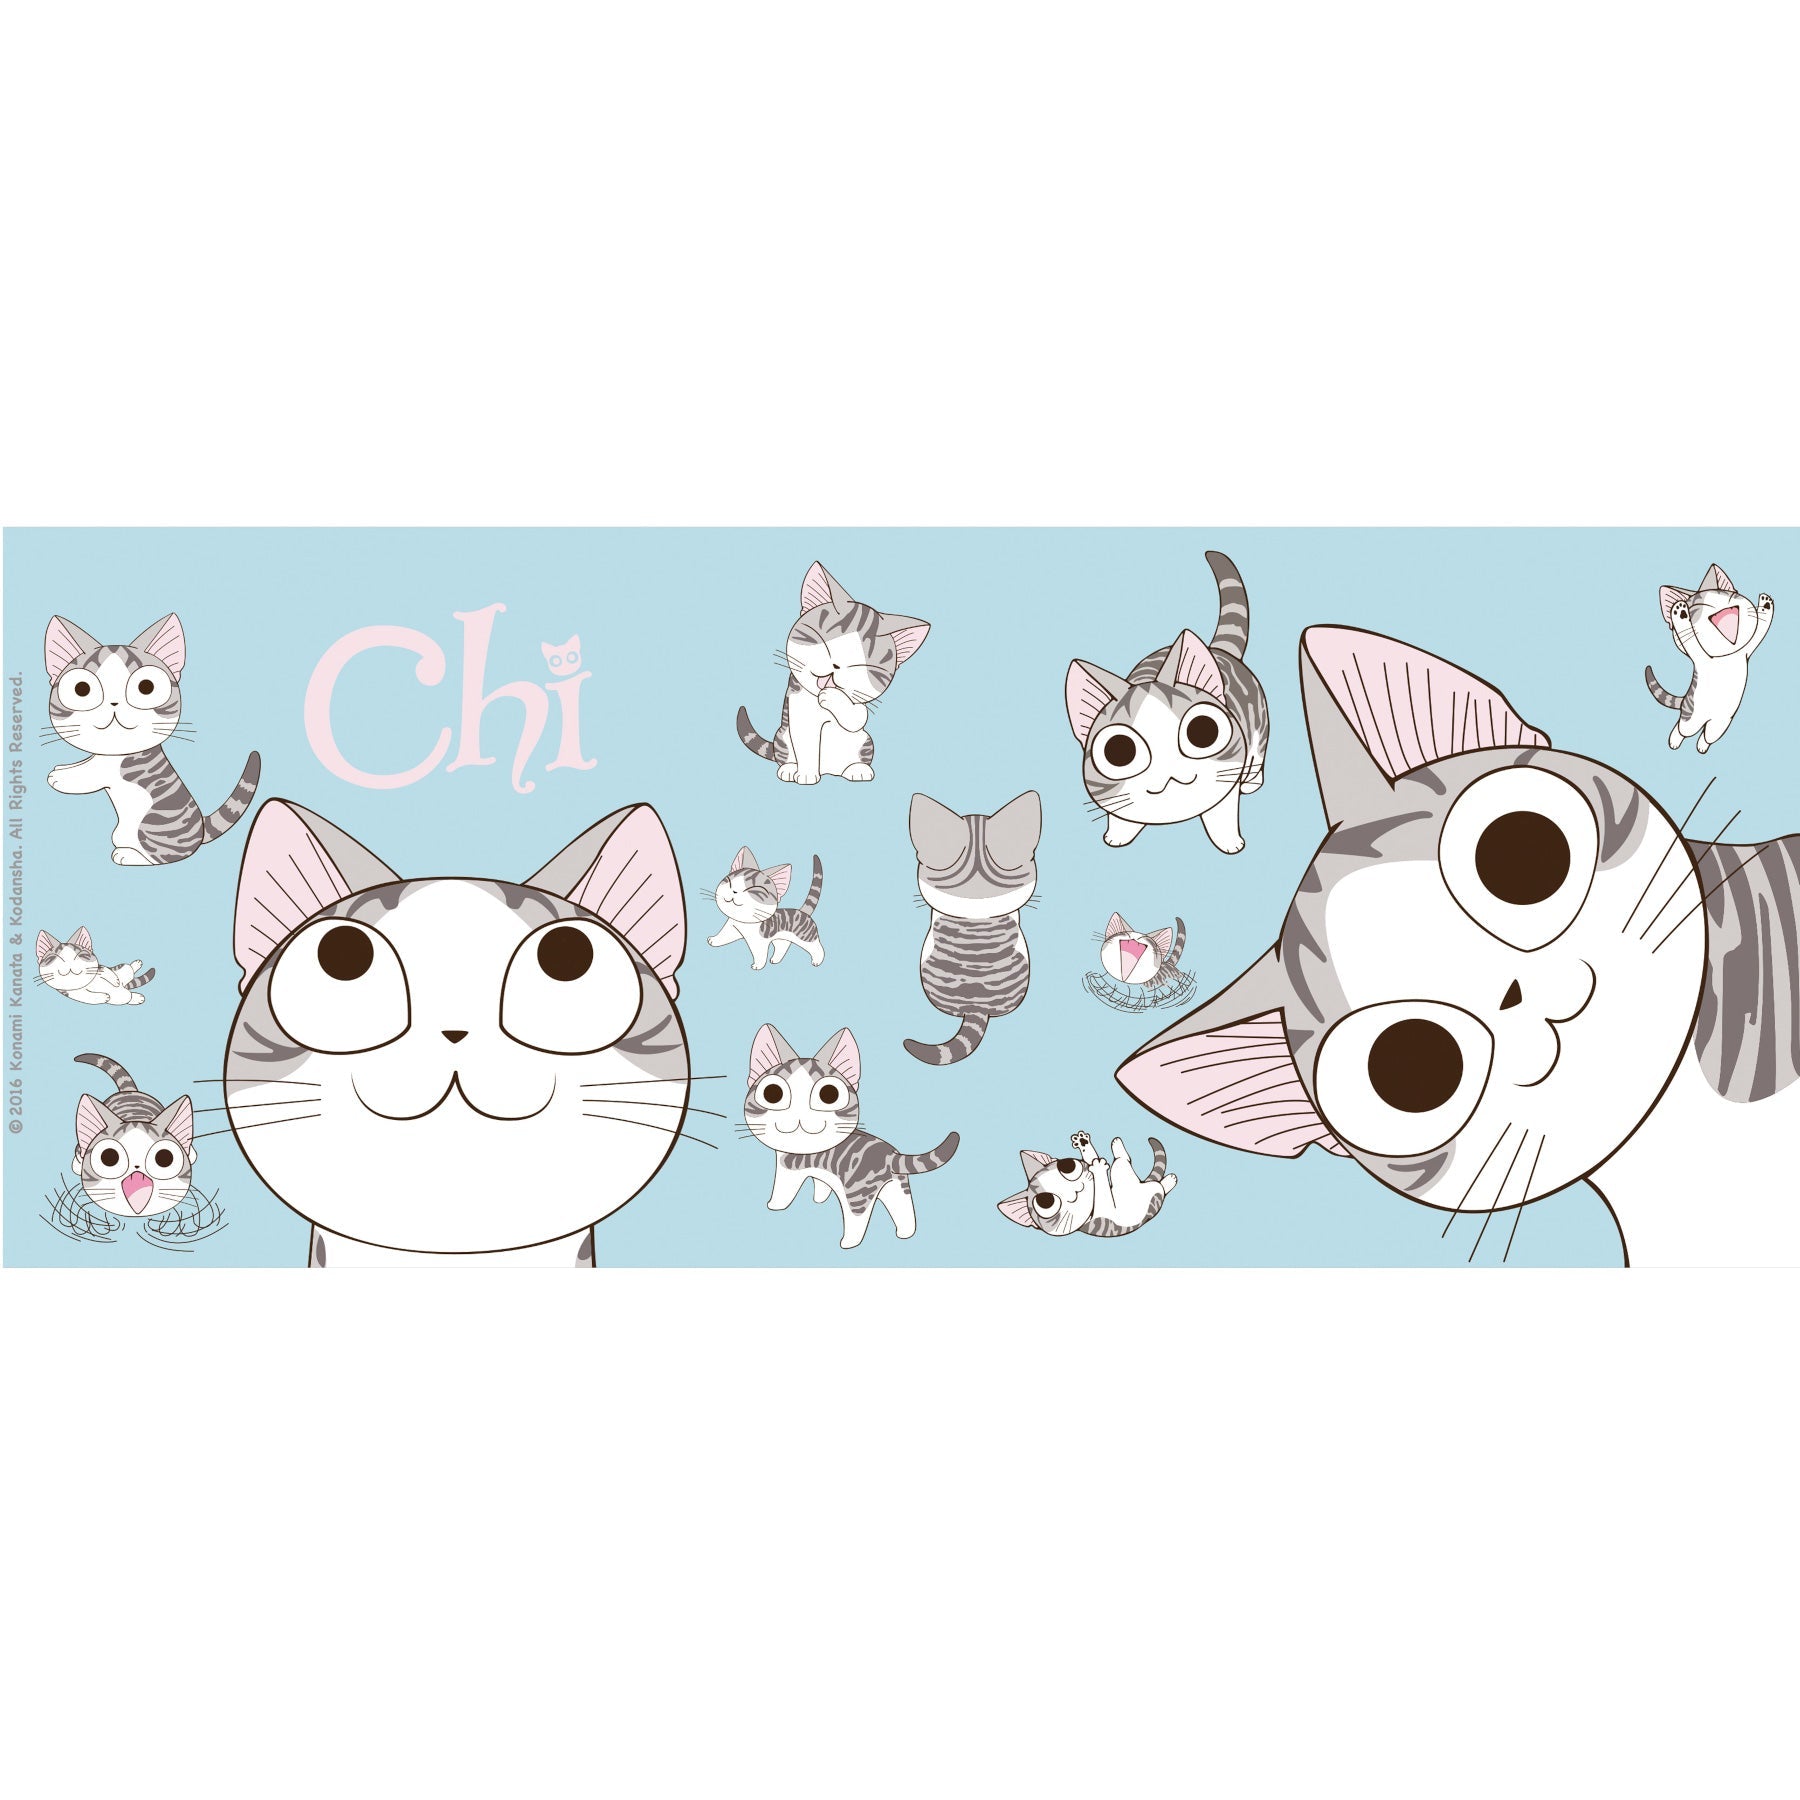 Chi's Sweet Home Kitty Poses Mug (16 oz.) - Abysse - 4